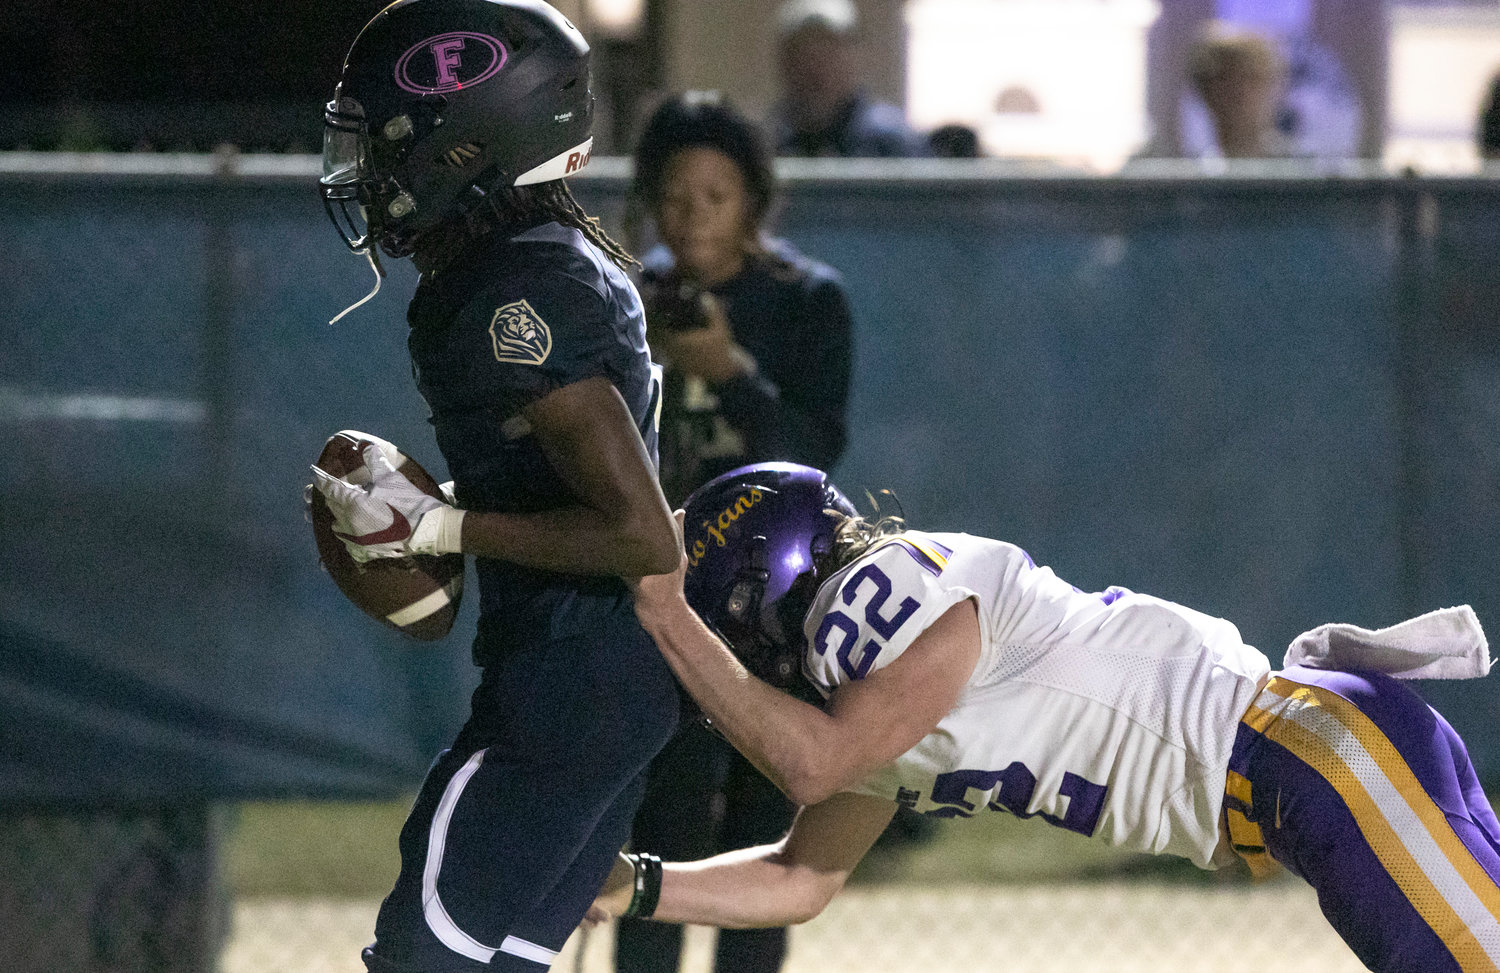 Lion receiver Makai Mitchell secures his first-half touchdown pass from Reese Tynes in the corner of the end zone to help Foley down Daphne 34-7 Friday night to claim its first region title since 2007.